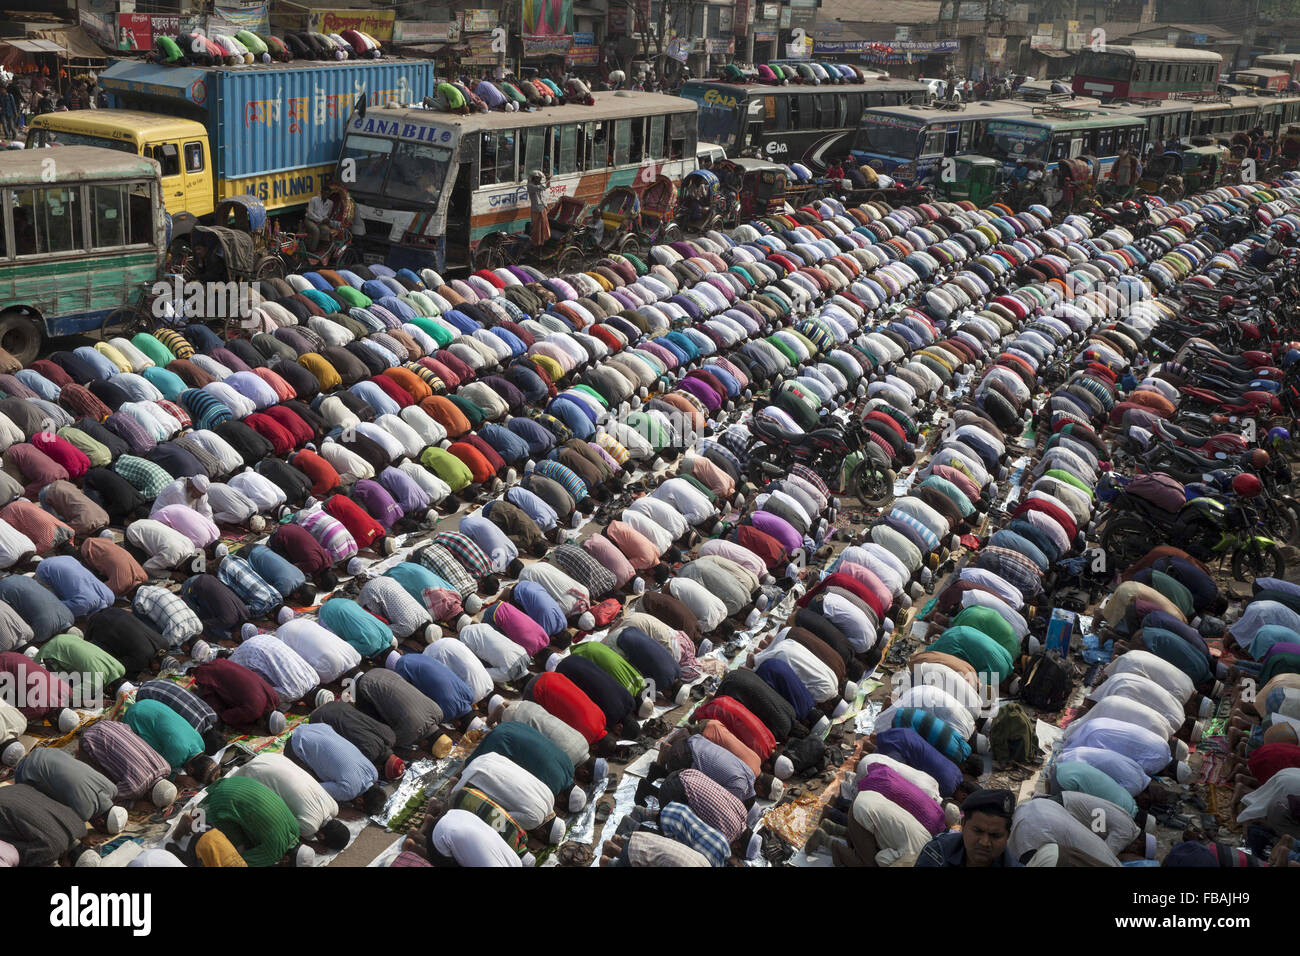 Jan. 16, 2015 - Dhaka, Bangladesh - Muslim devotees offer Jumma prayers while attending the World Muslim Congregation, also known as Biswa Ijtema, at Tongi, on the outskirts of the Bangladesh capital Dhaka.Bangladesh's Biswa Ijtema, or World Muslim Congregation, is the world's second largest Islamic gathering after the Hajj with devotees coming from all over the globe to pray and hear imams preach for three days. (Credit Image: © Zakir Hossain Chowdhury/ZUMA Wire) Stock Photo